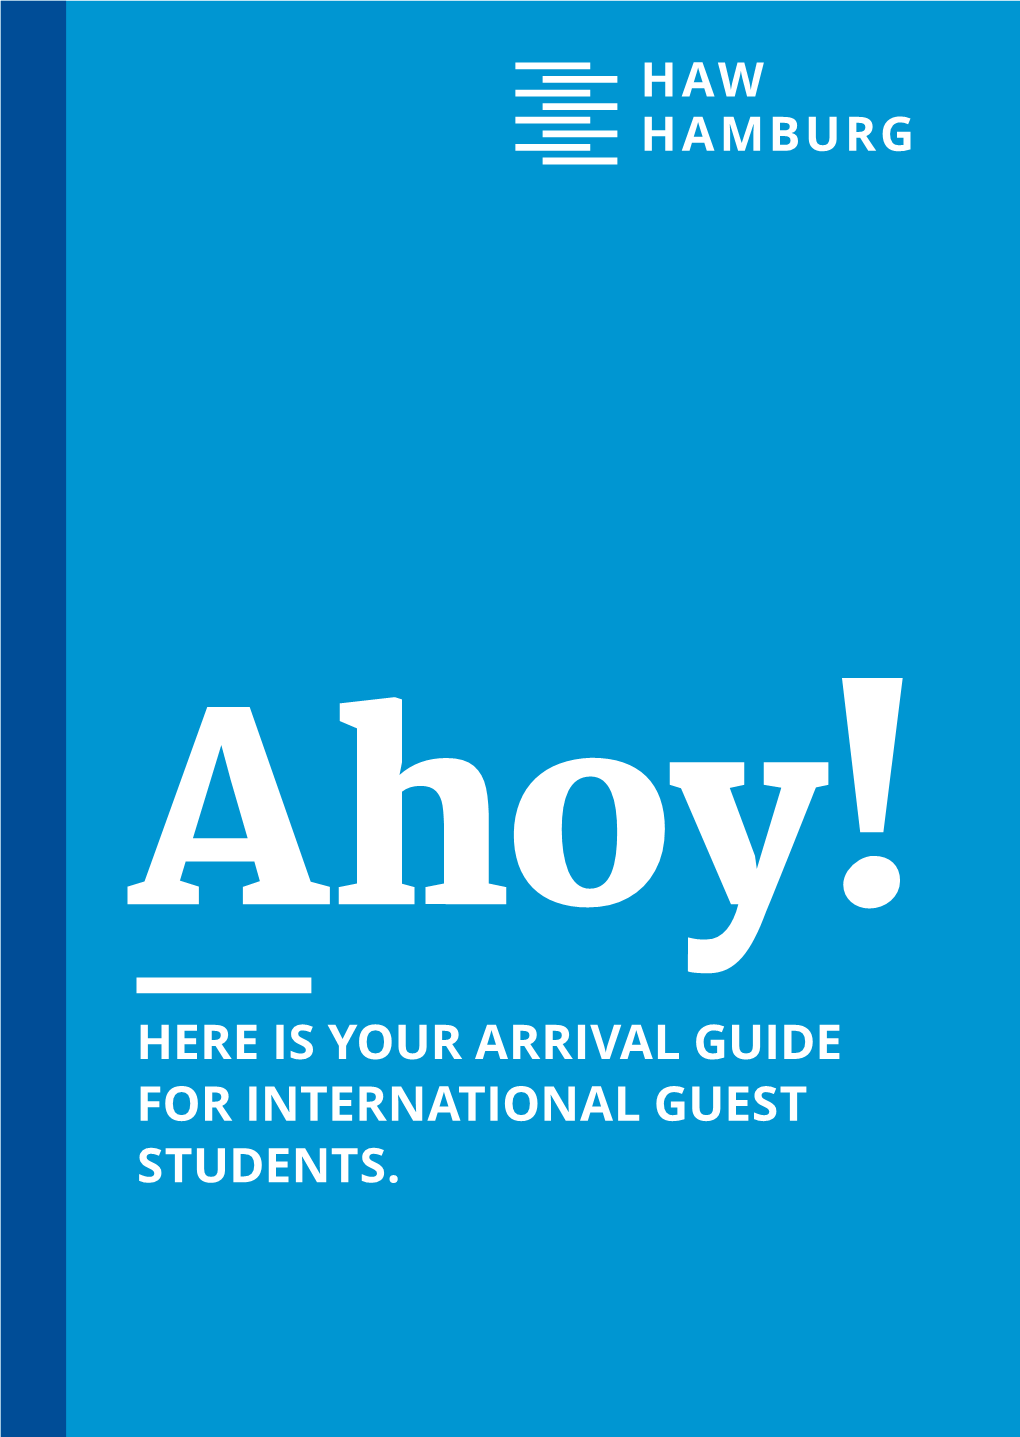 Here Is Your Arrival Guide for International Guest Students. Welcome to HAW Hamburg!